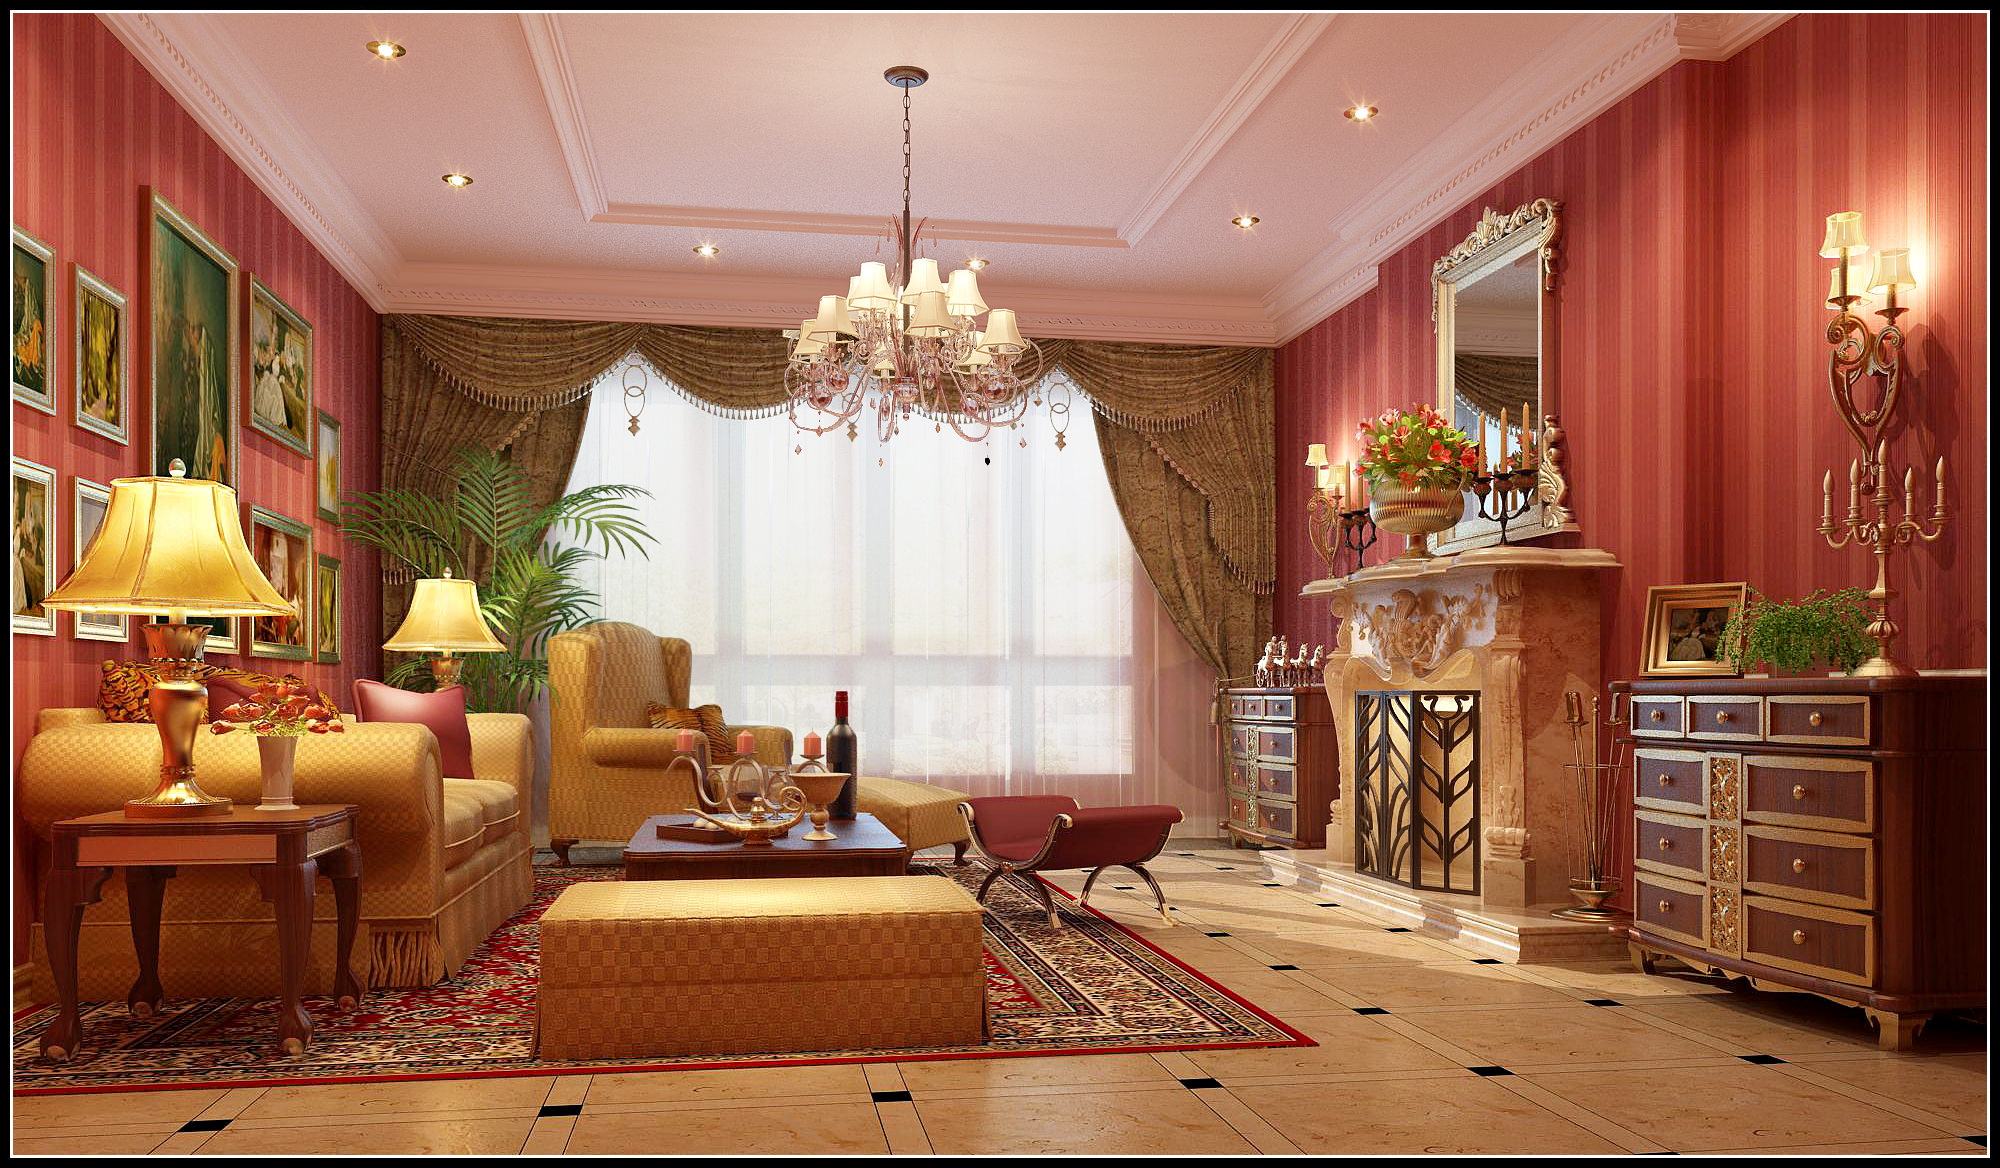 Cozy Living Room With Red Wallpapers 3D Model max   CGTradercom